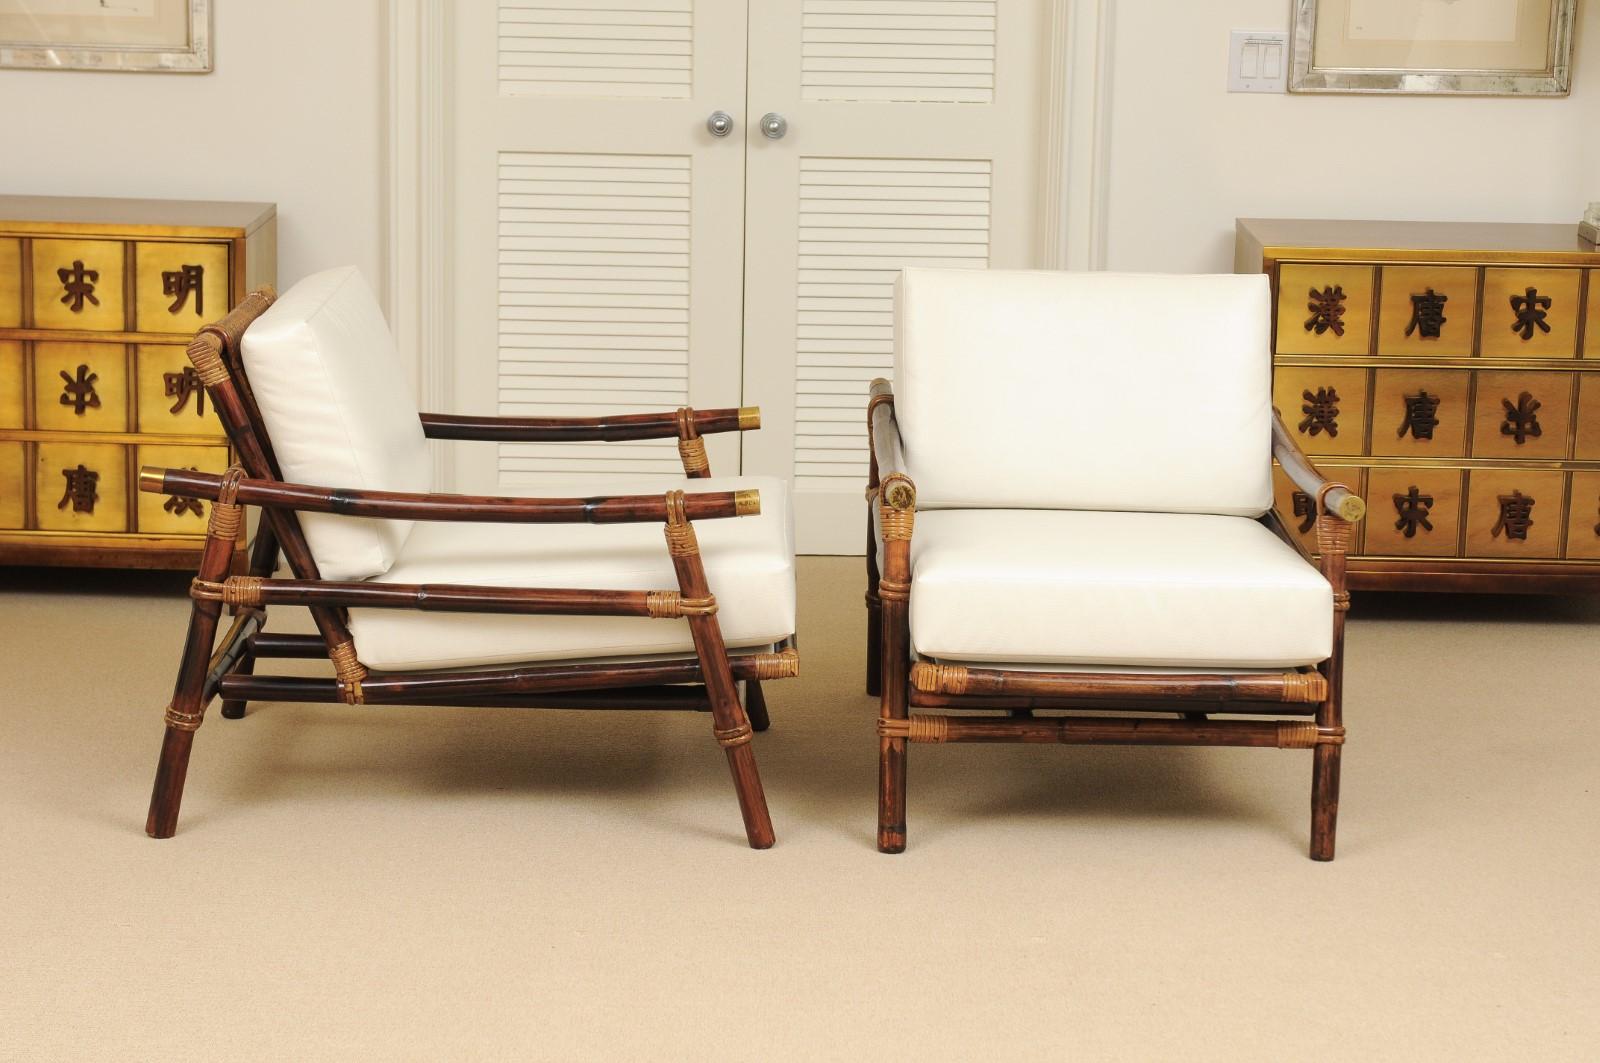 Mid-20th Century Superb Restored Pair of Campaign Loungers by Wisner for Ficks Reed, circa 1954